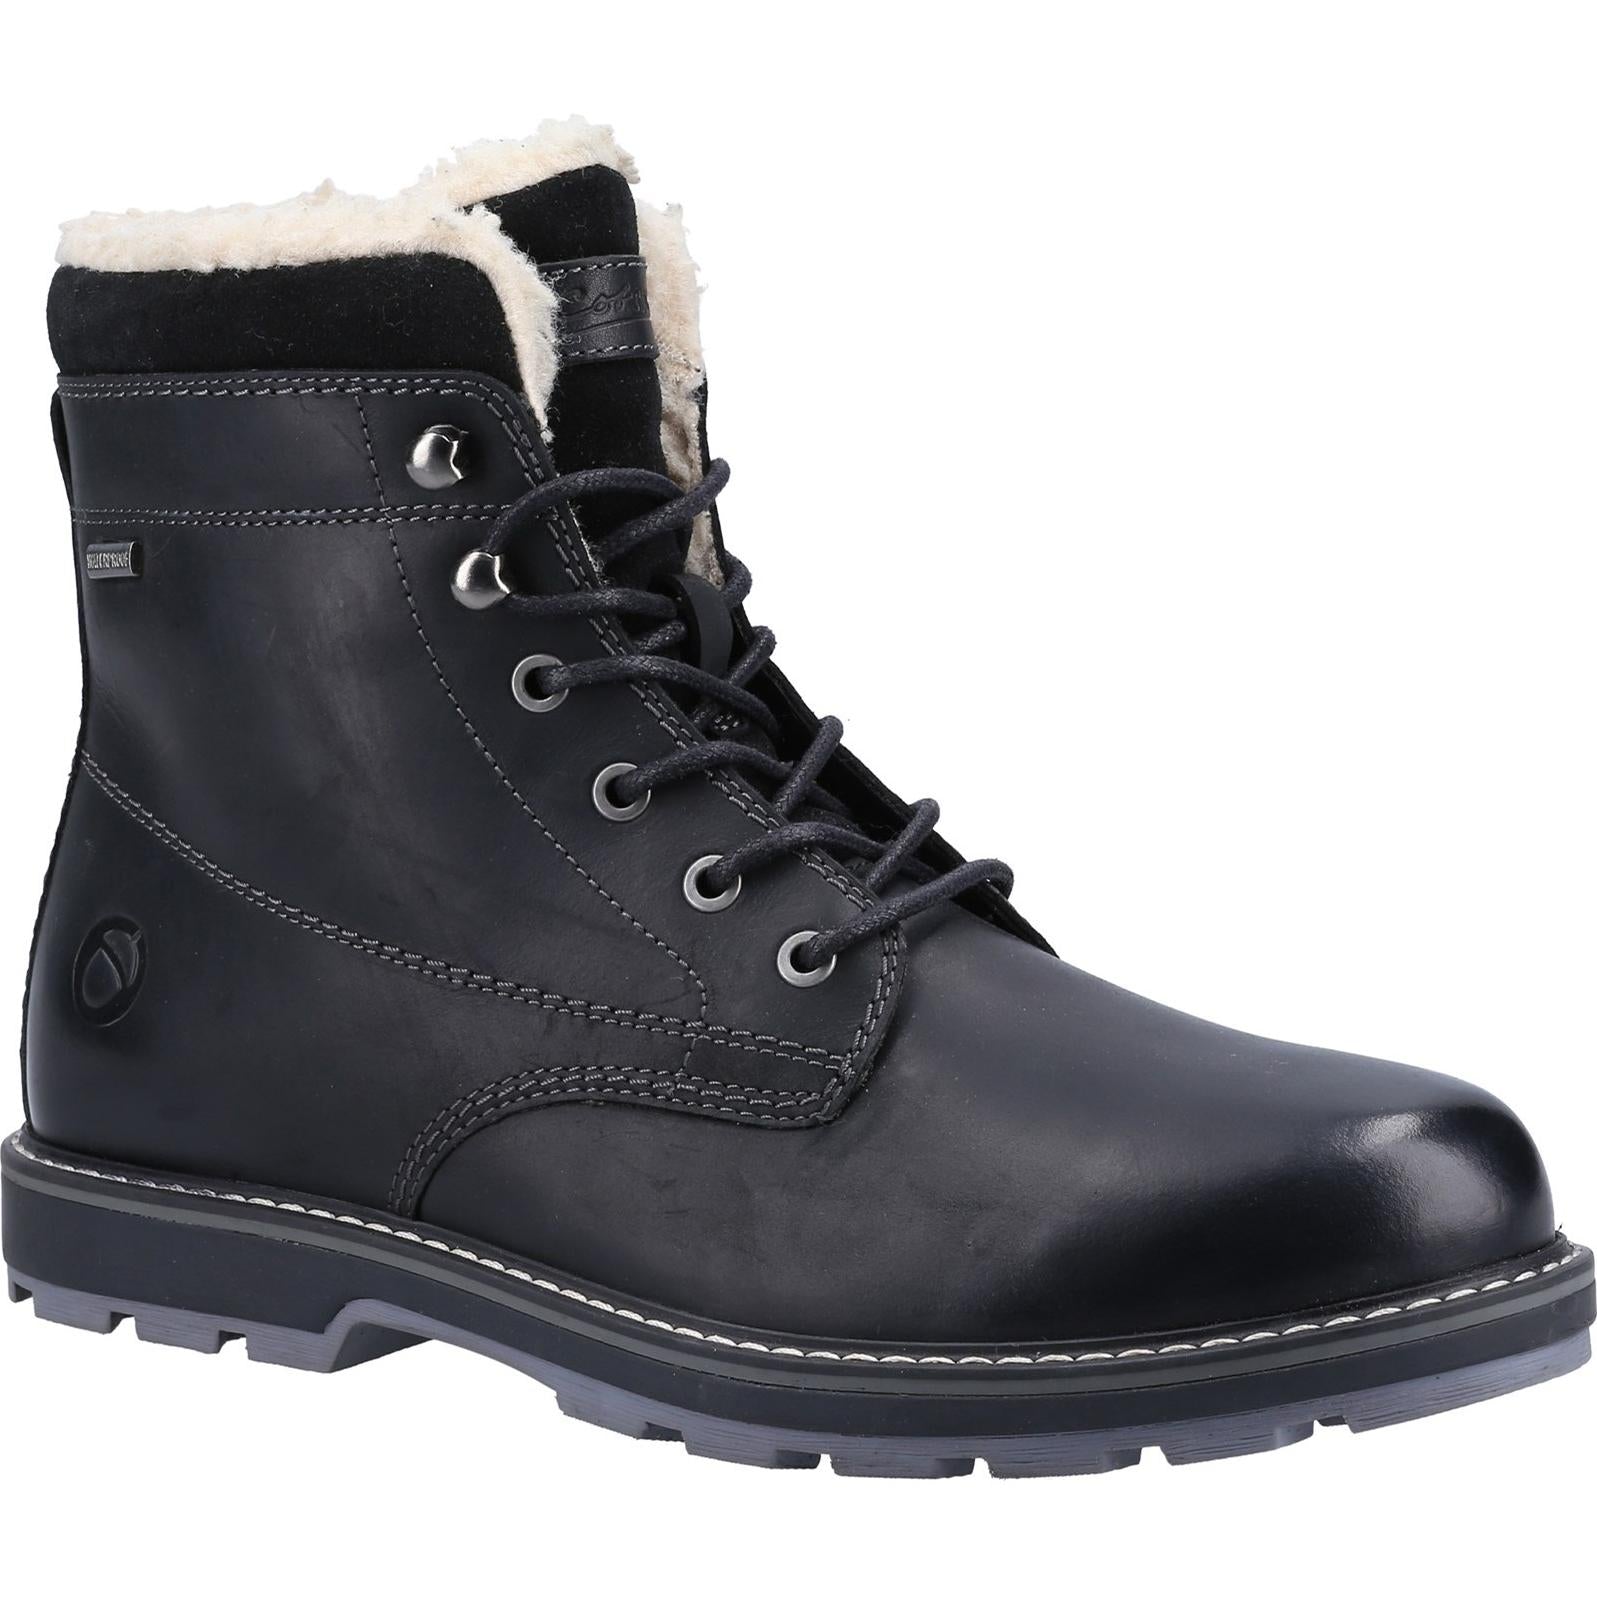 Cotswold Bishop Work Boots